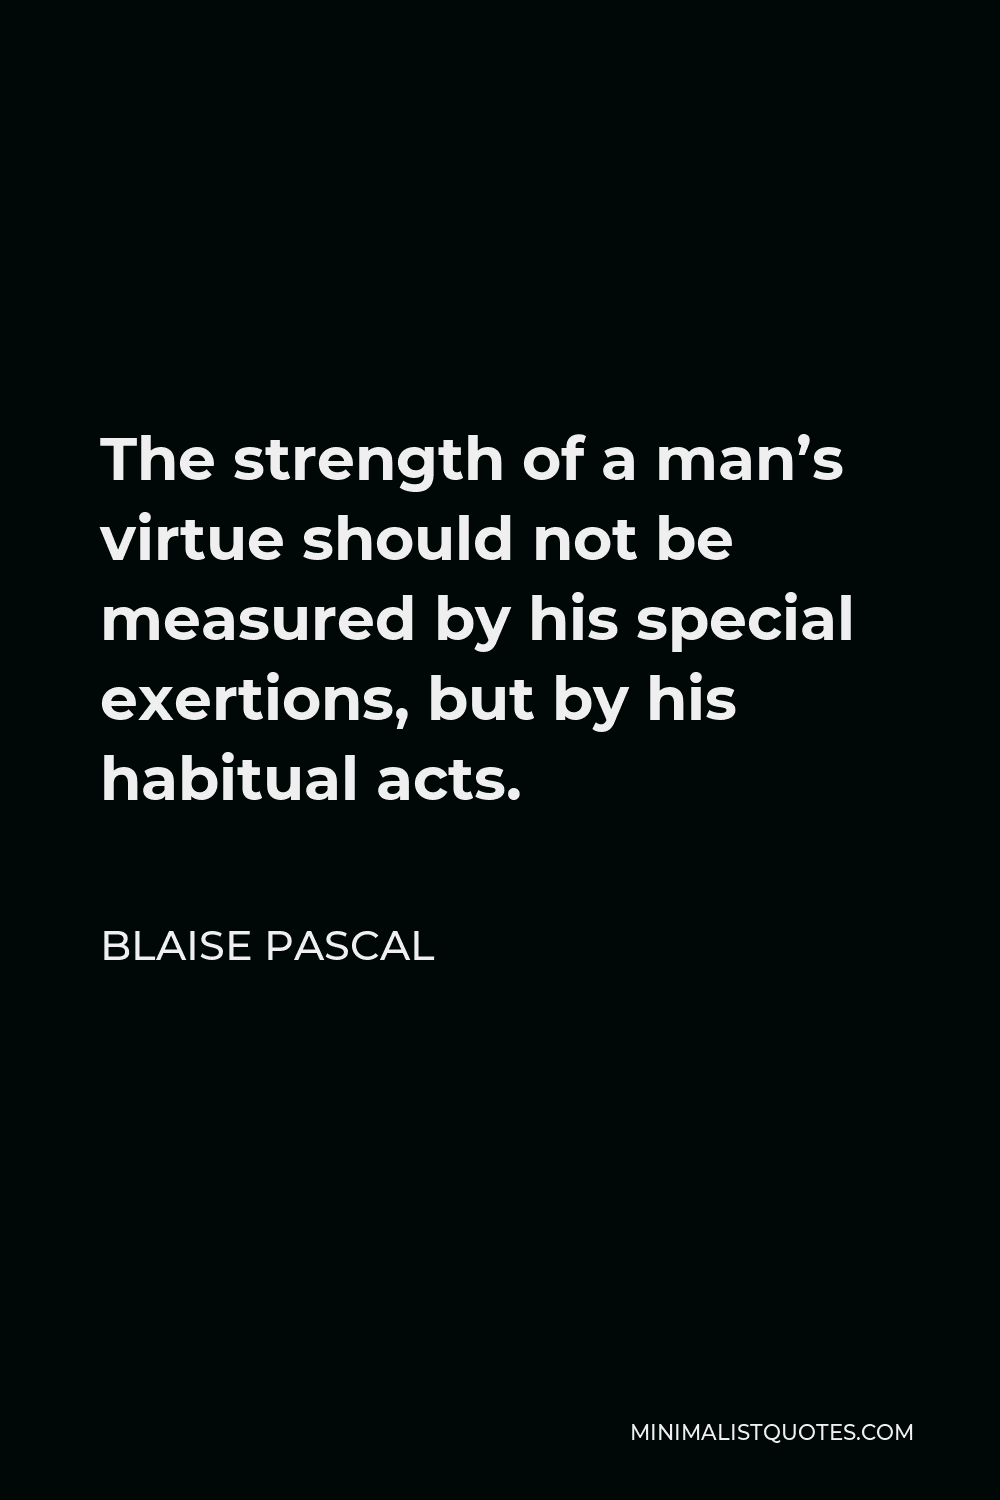 Blaise Pascal Quote - The strength of a man’s virtue should not be measured by his special exertions, but by his habitual acts.